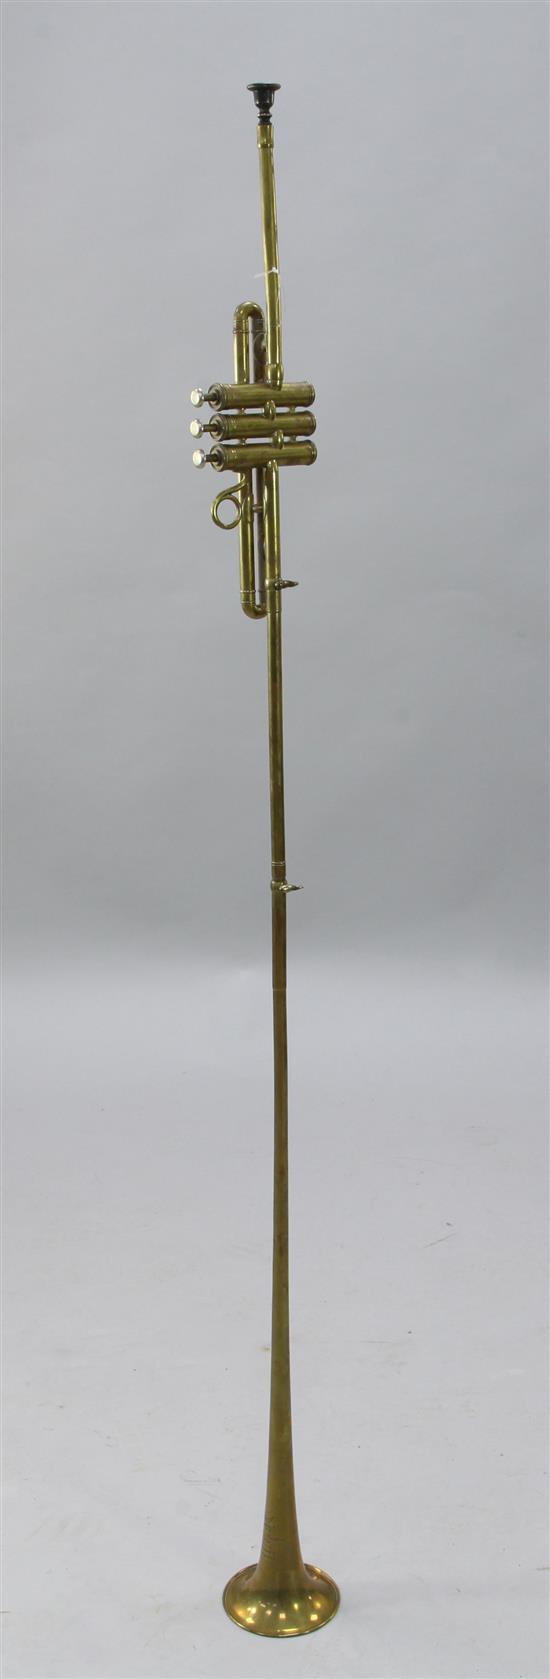 An Aida brass trumpet, by Boosey & Hawkes, 54.5in.